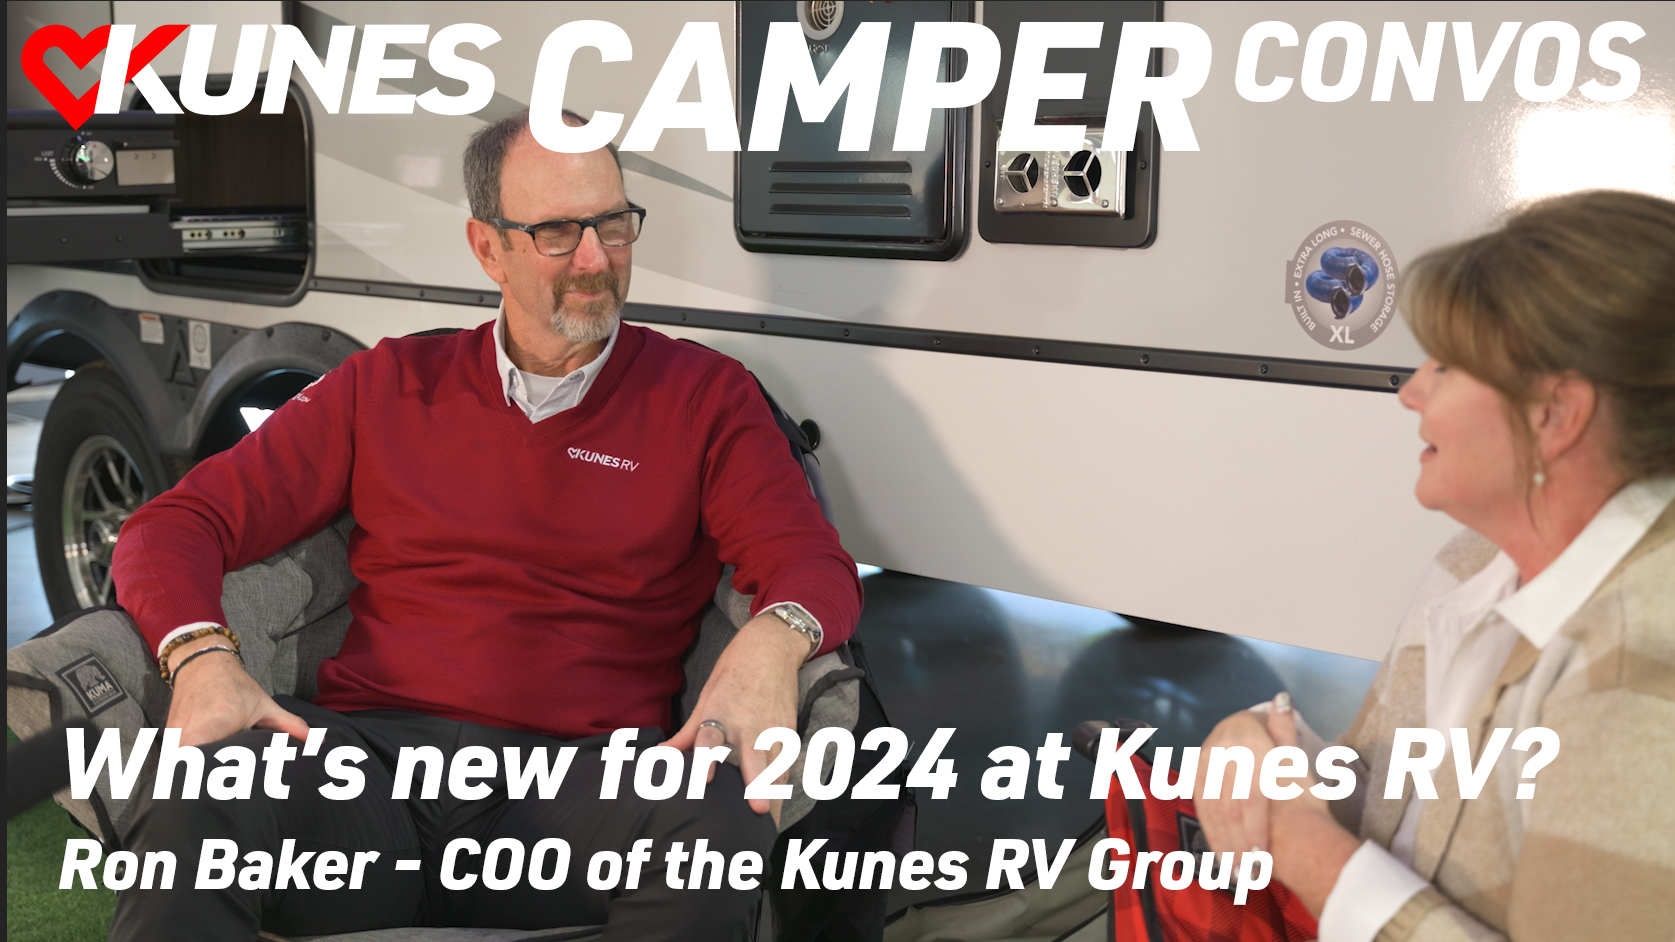 Kunes Camper Convos, What's new in 2024 for Kunes RV